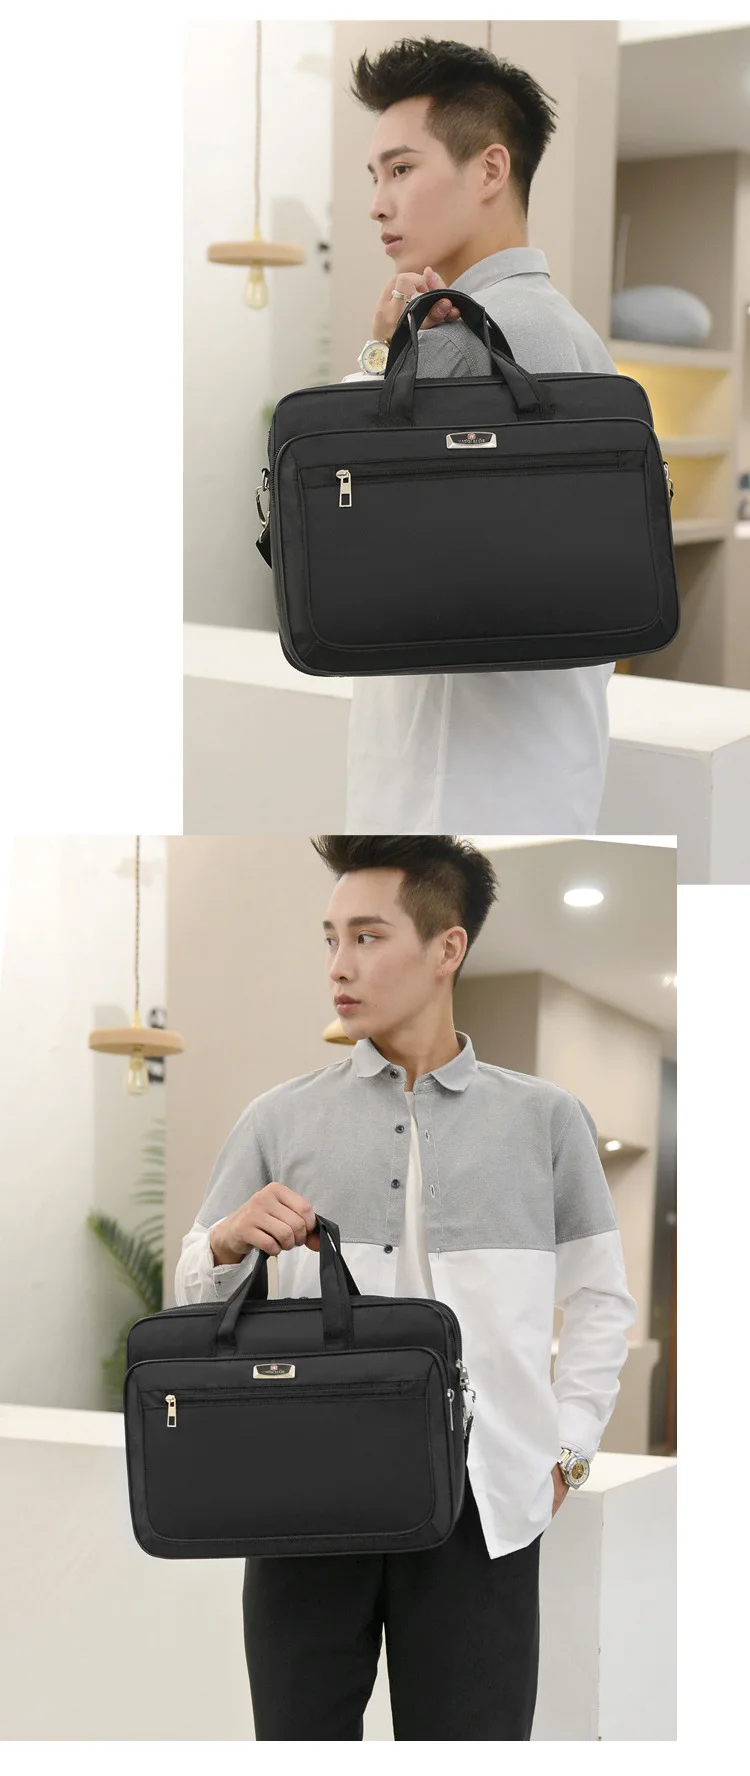 Men's Business Briefcase Weekend Travel Document Storage Bag Laptop Protection Handbag Material Organize Pouch Accessories Items